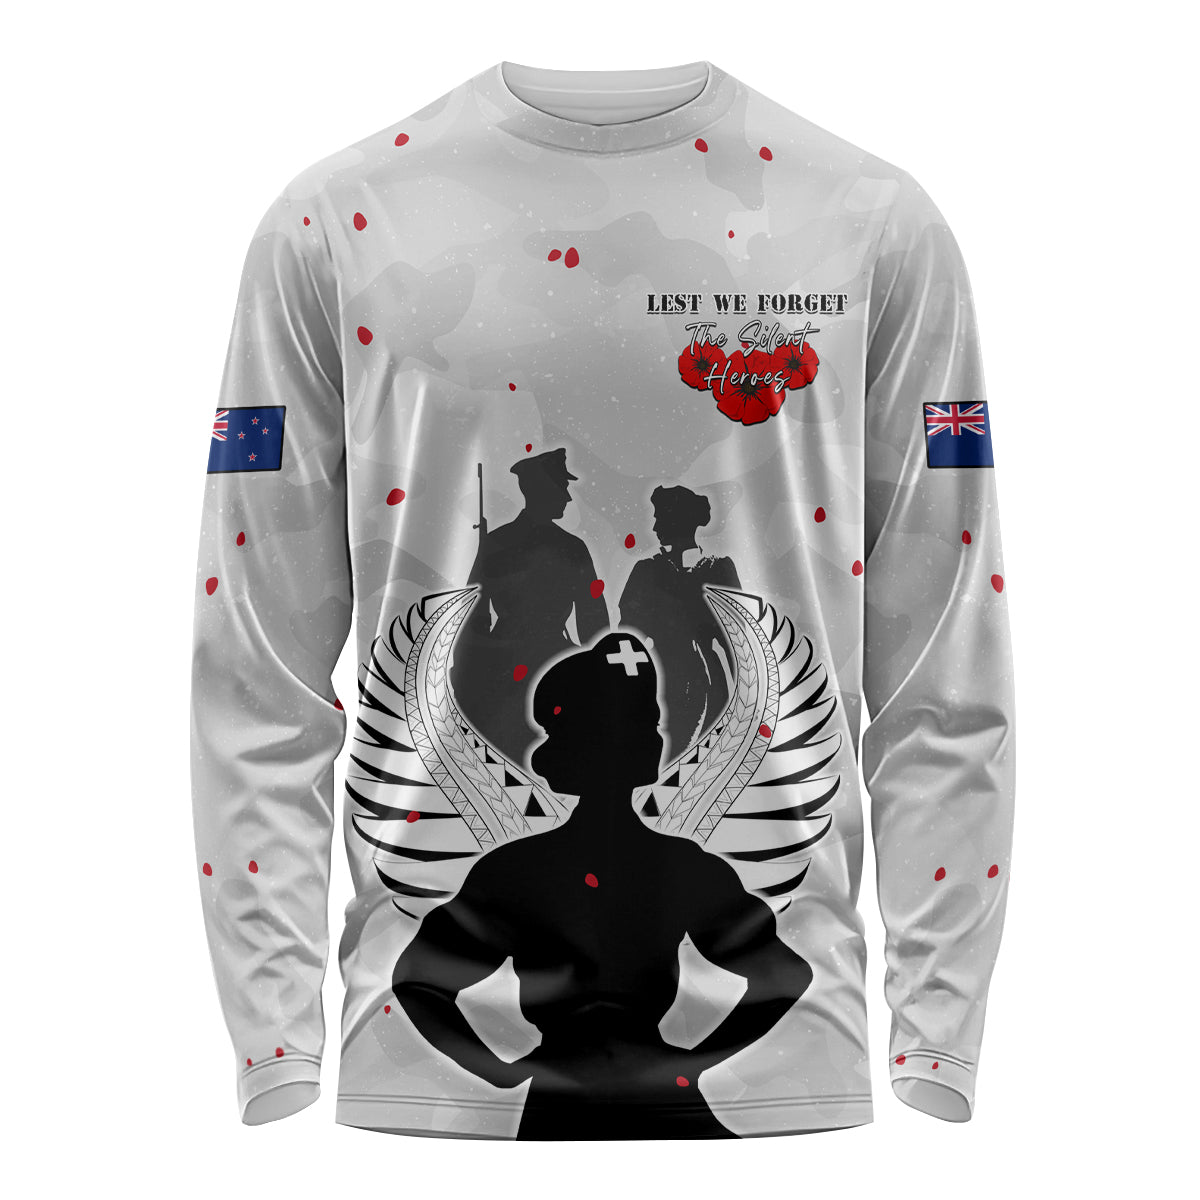 New Zealand ANZAC Day Long Sleeve Shirt For The Nurse Lest We Forget LT05 Unisex White - Polynesian Pride